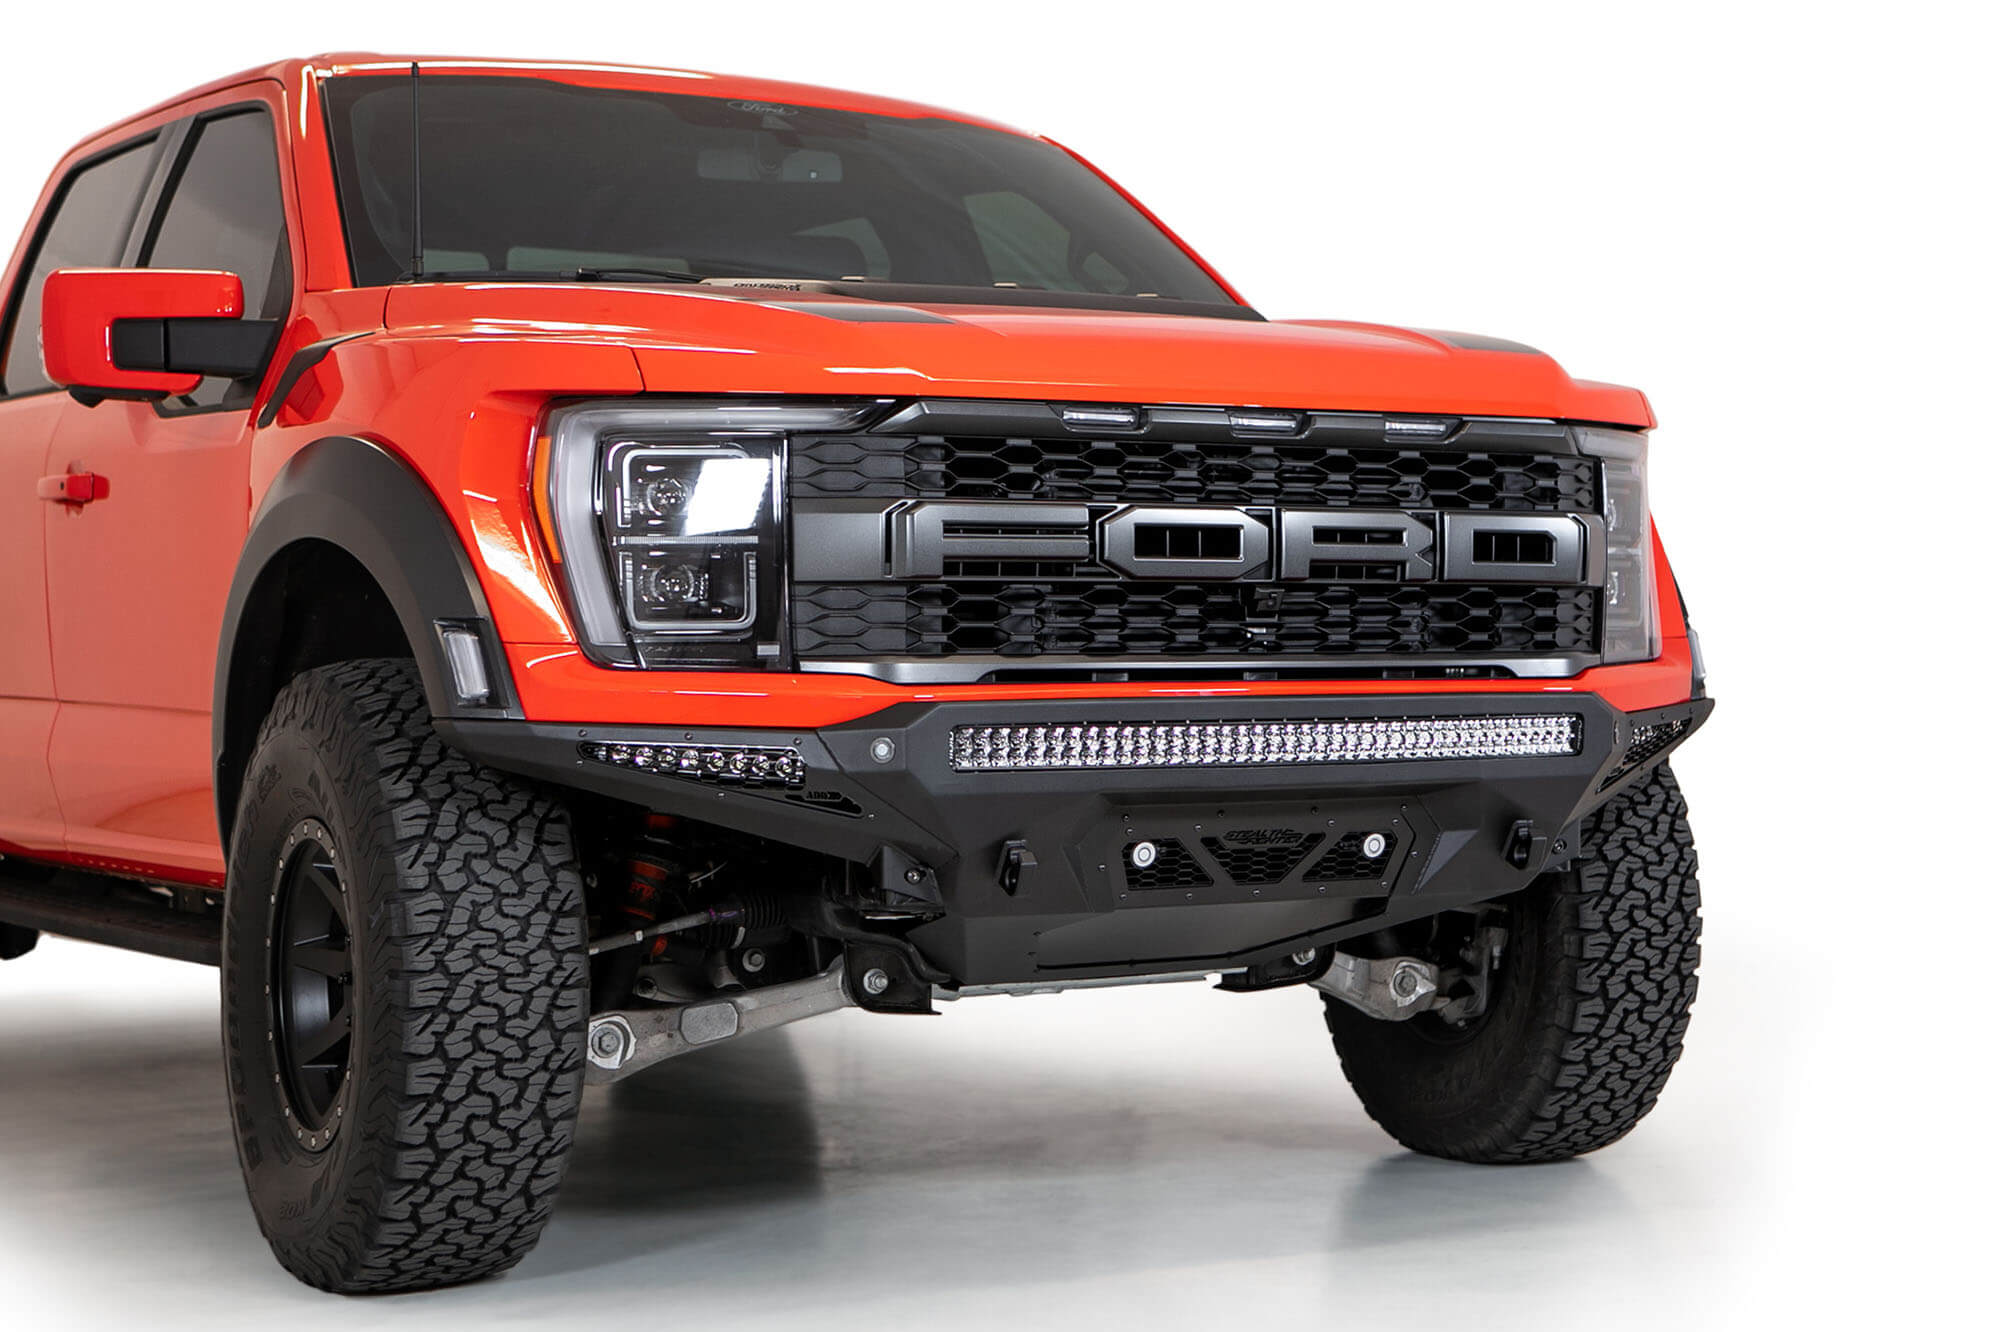 2021 Ford Ranger - Performance Parts & Accessories